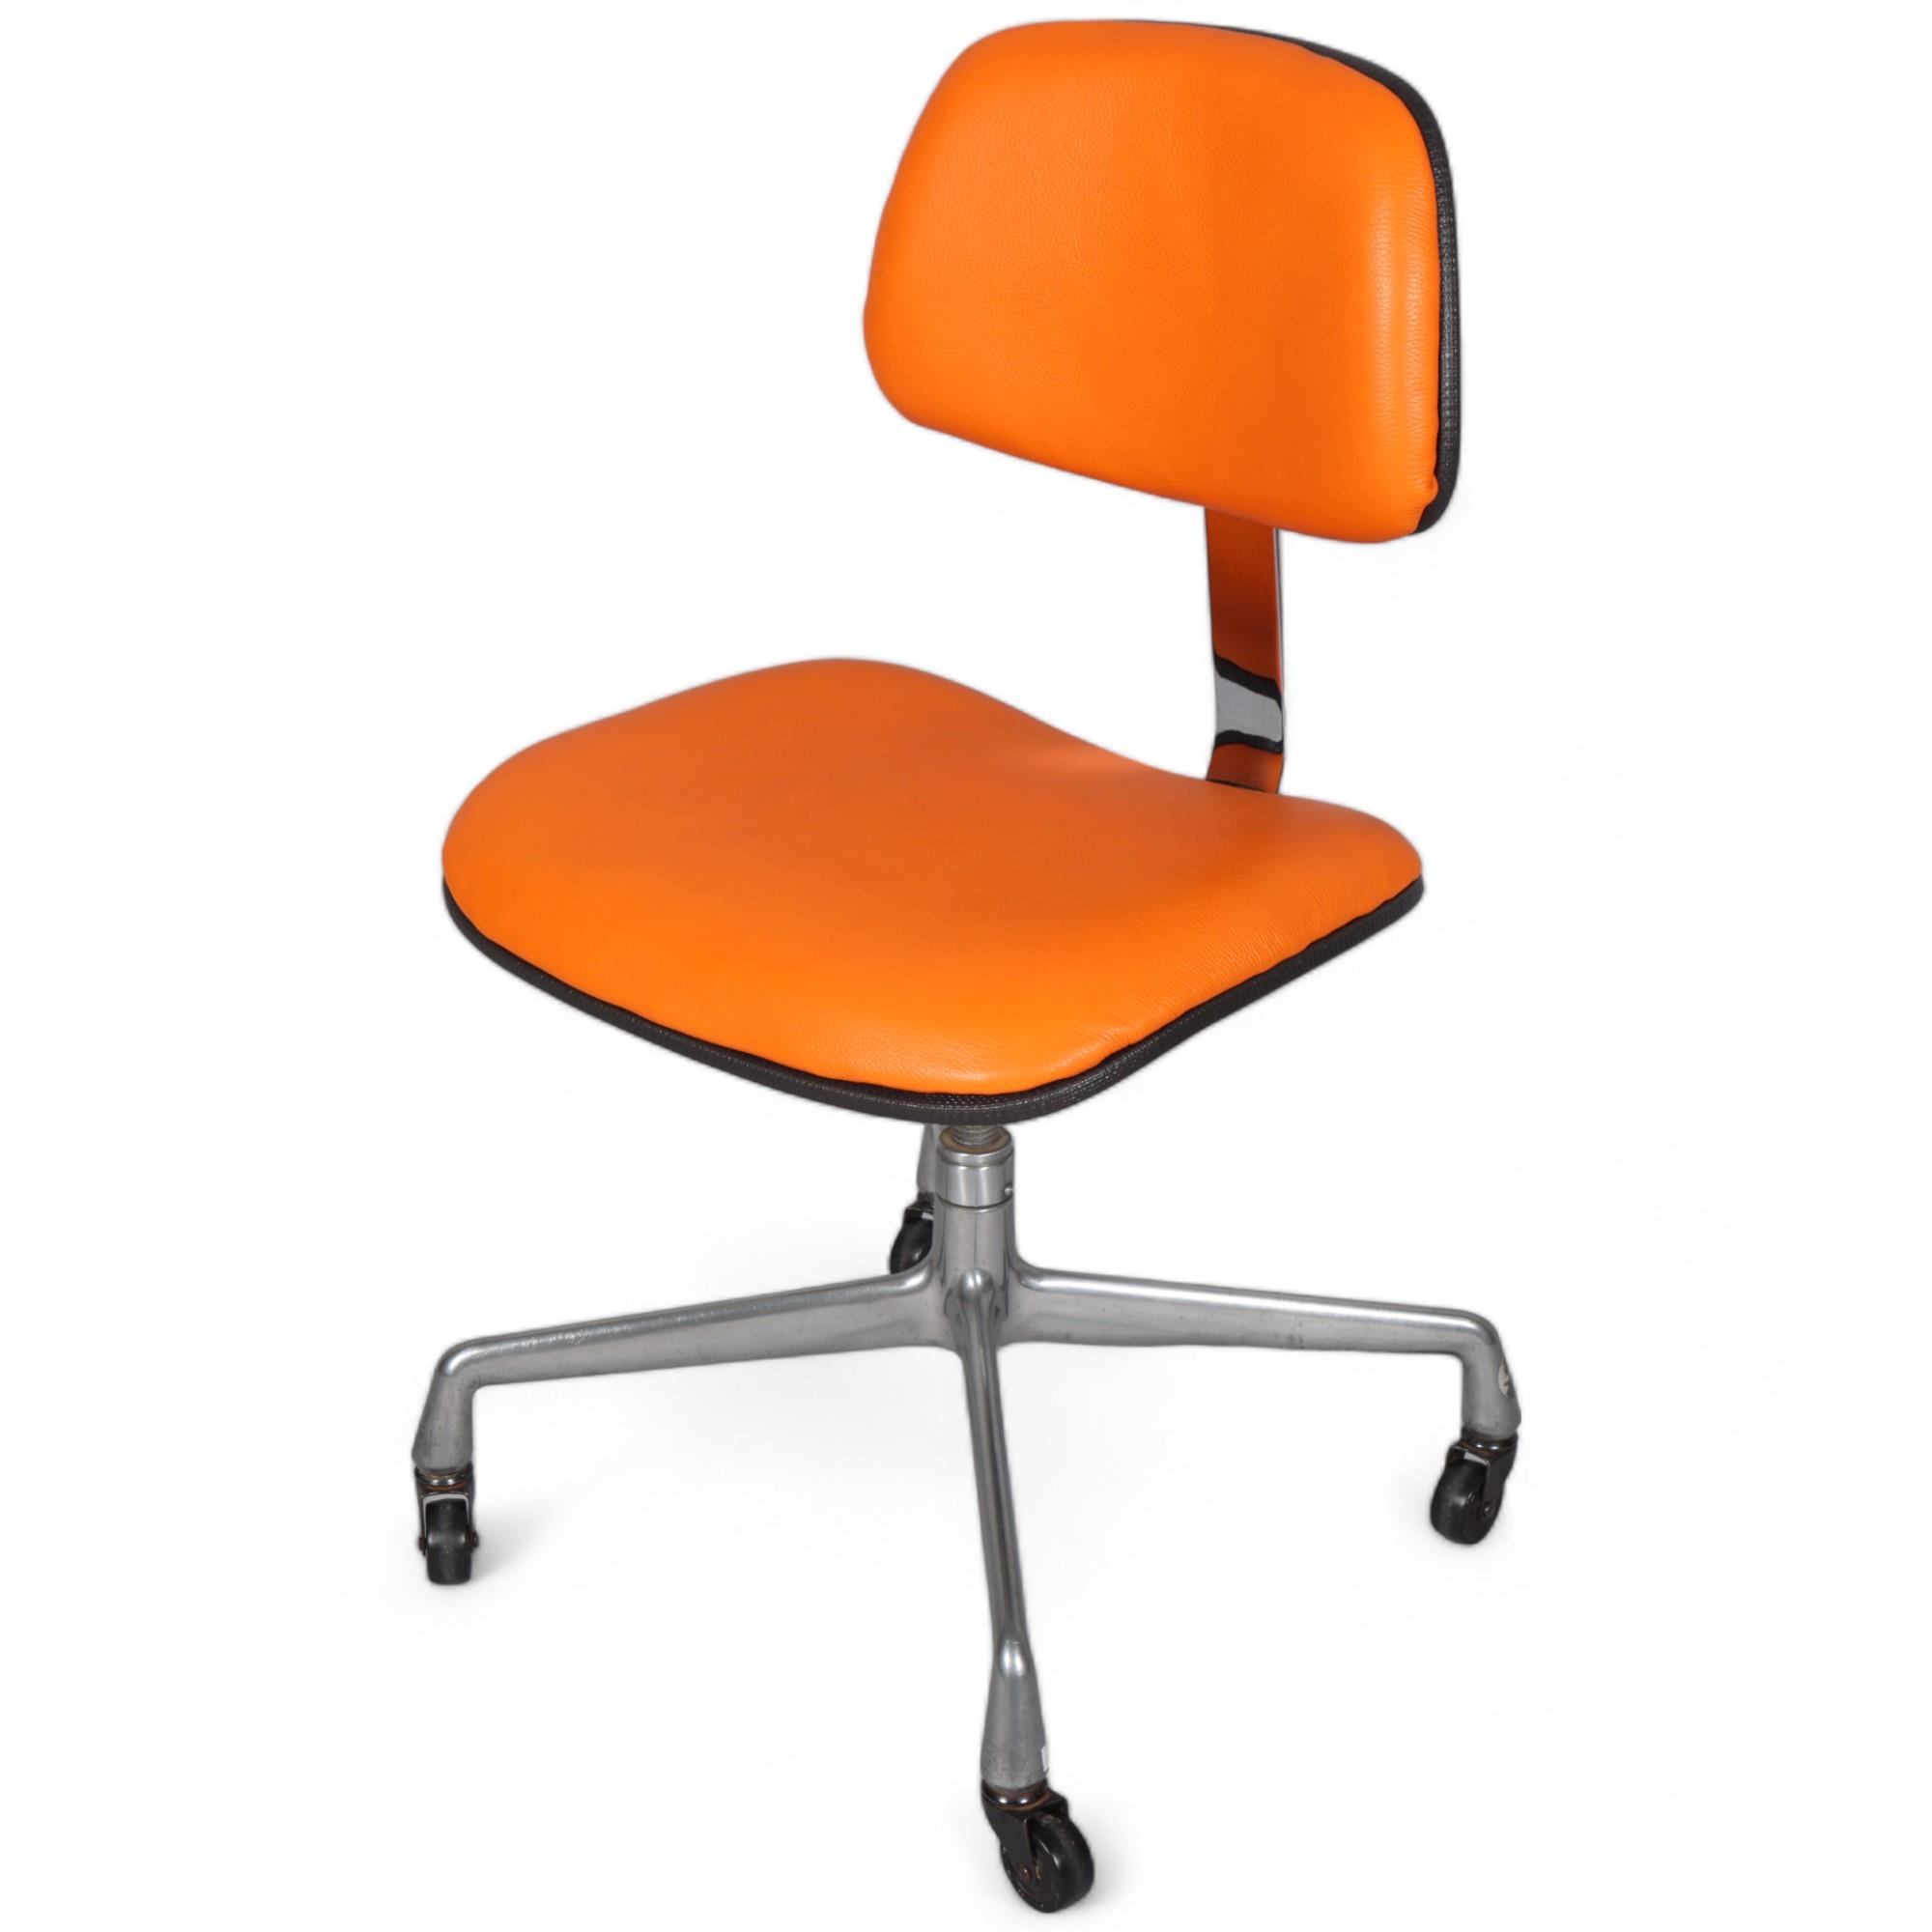 CHARLES EAMES, a rare Herman Miller EC228 secretarial chair, 1971, with orange leather upholstery,